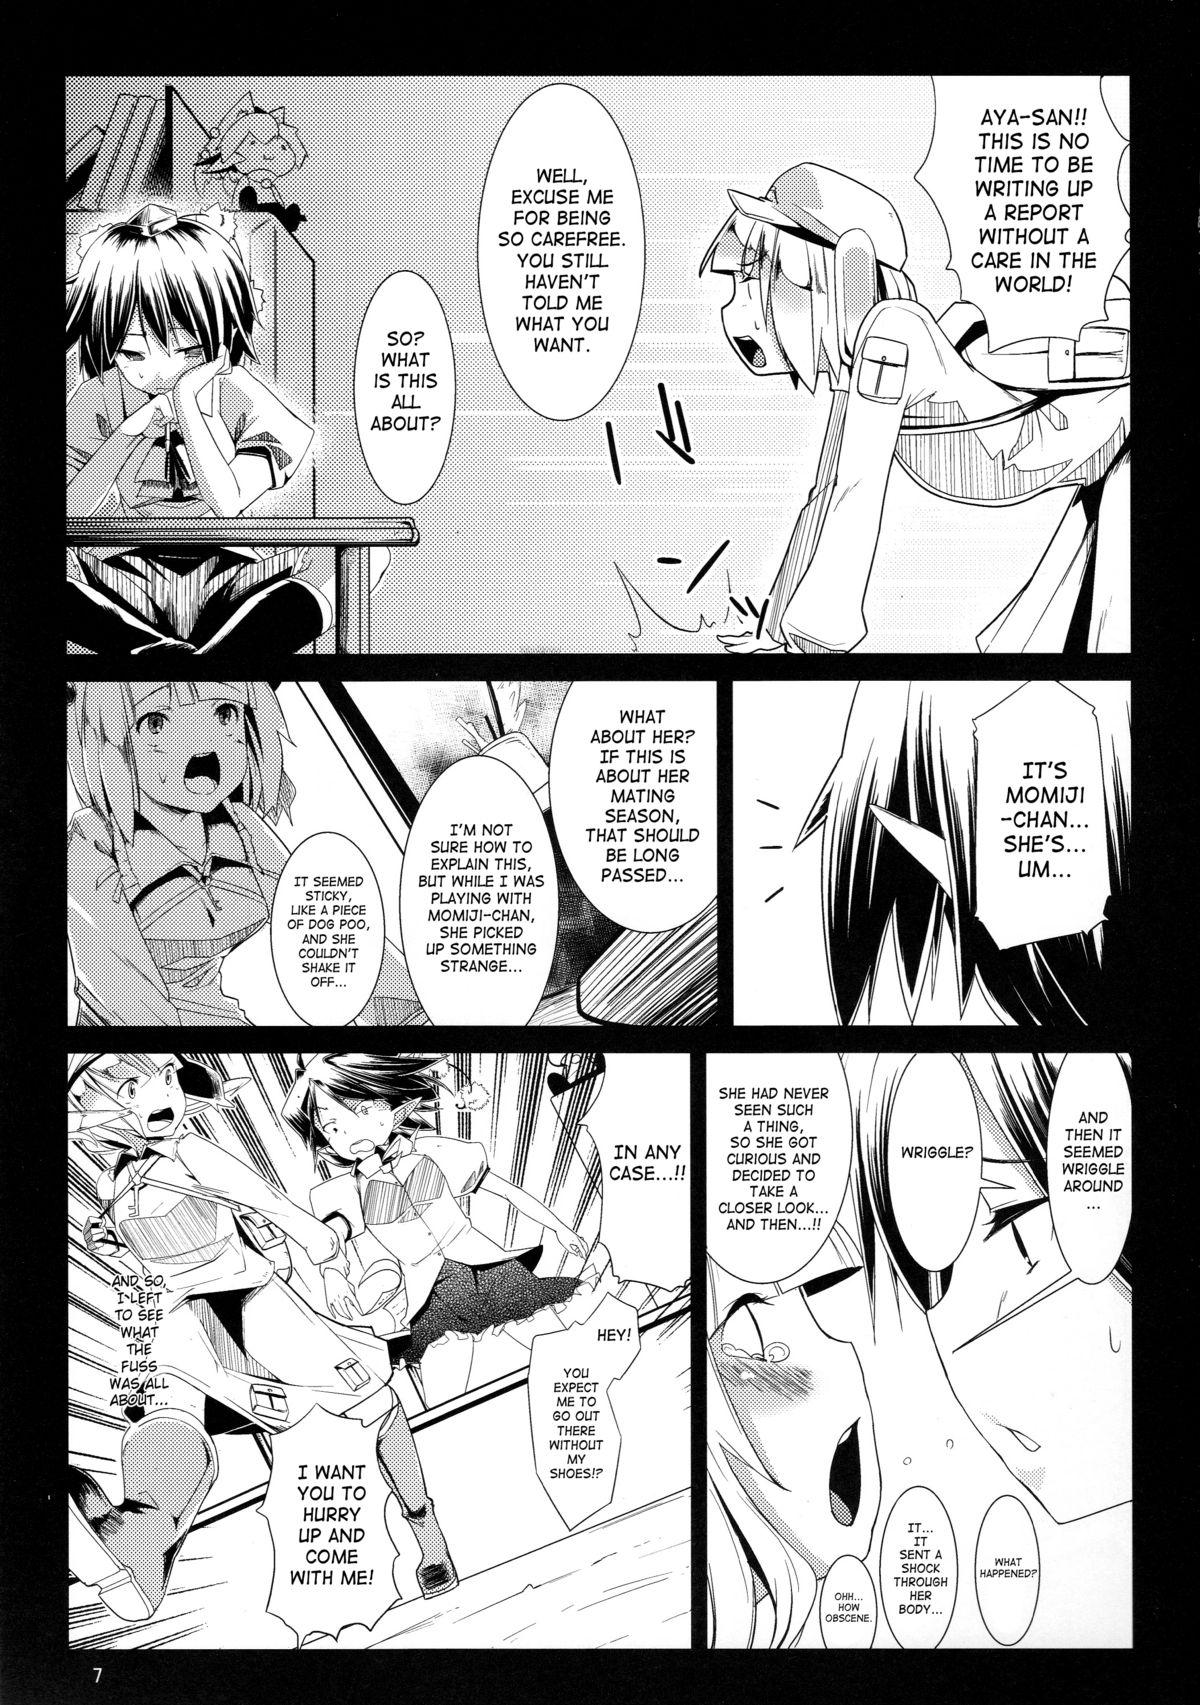 Argentina Inju - Touhou project Unshaved - Page 7